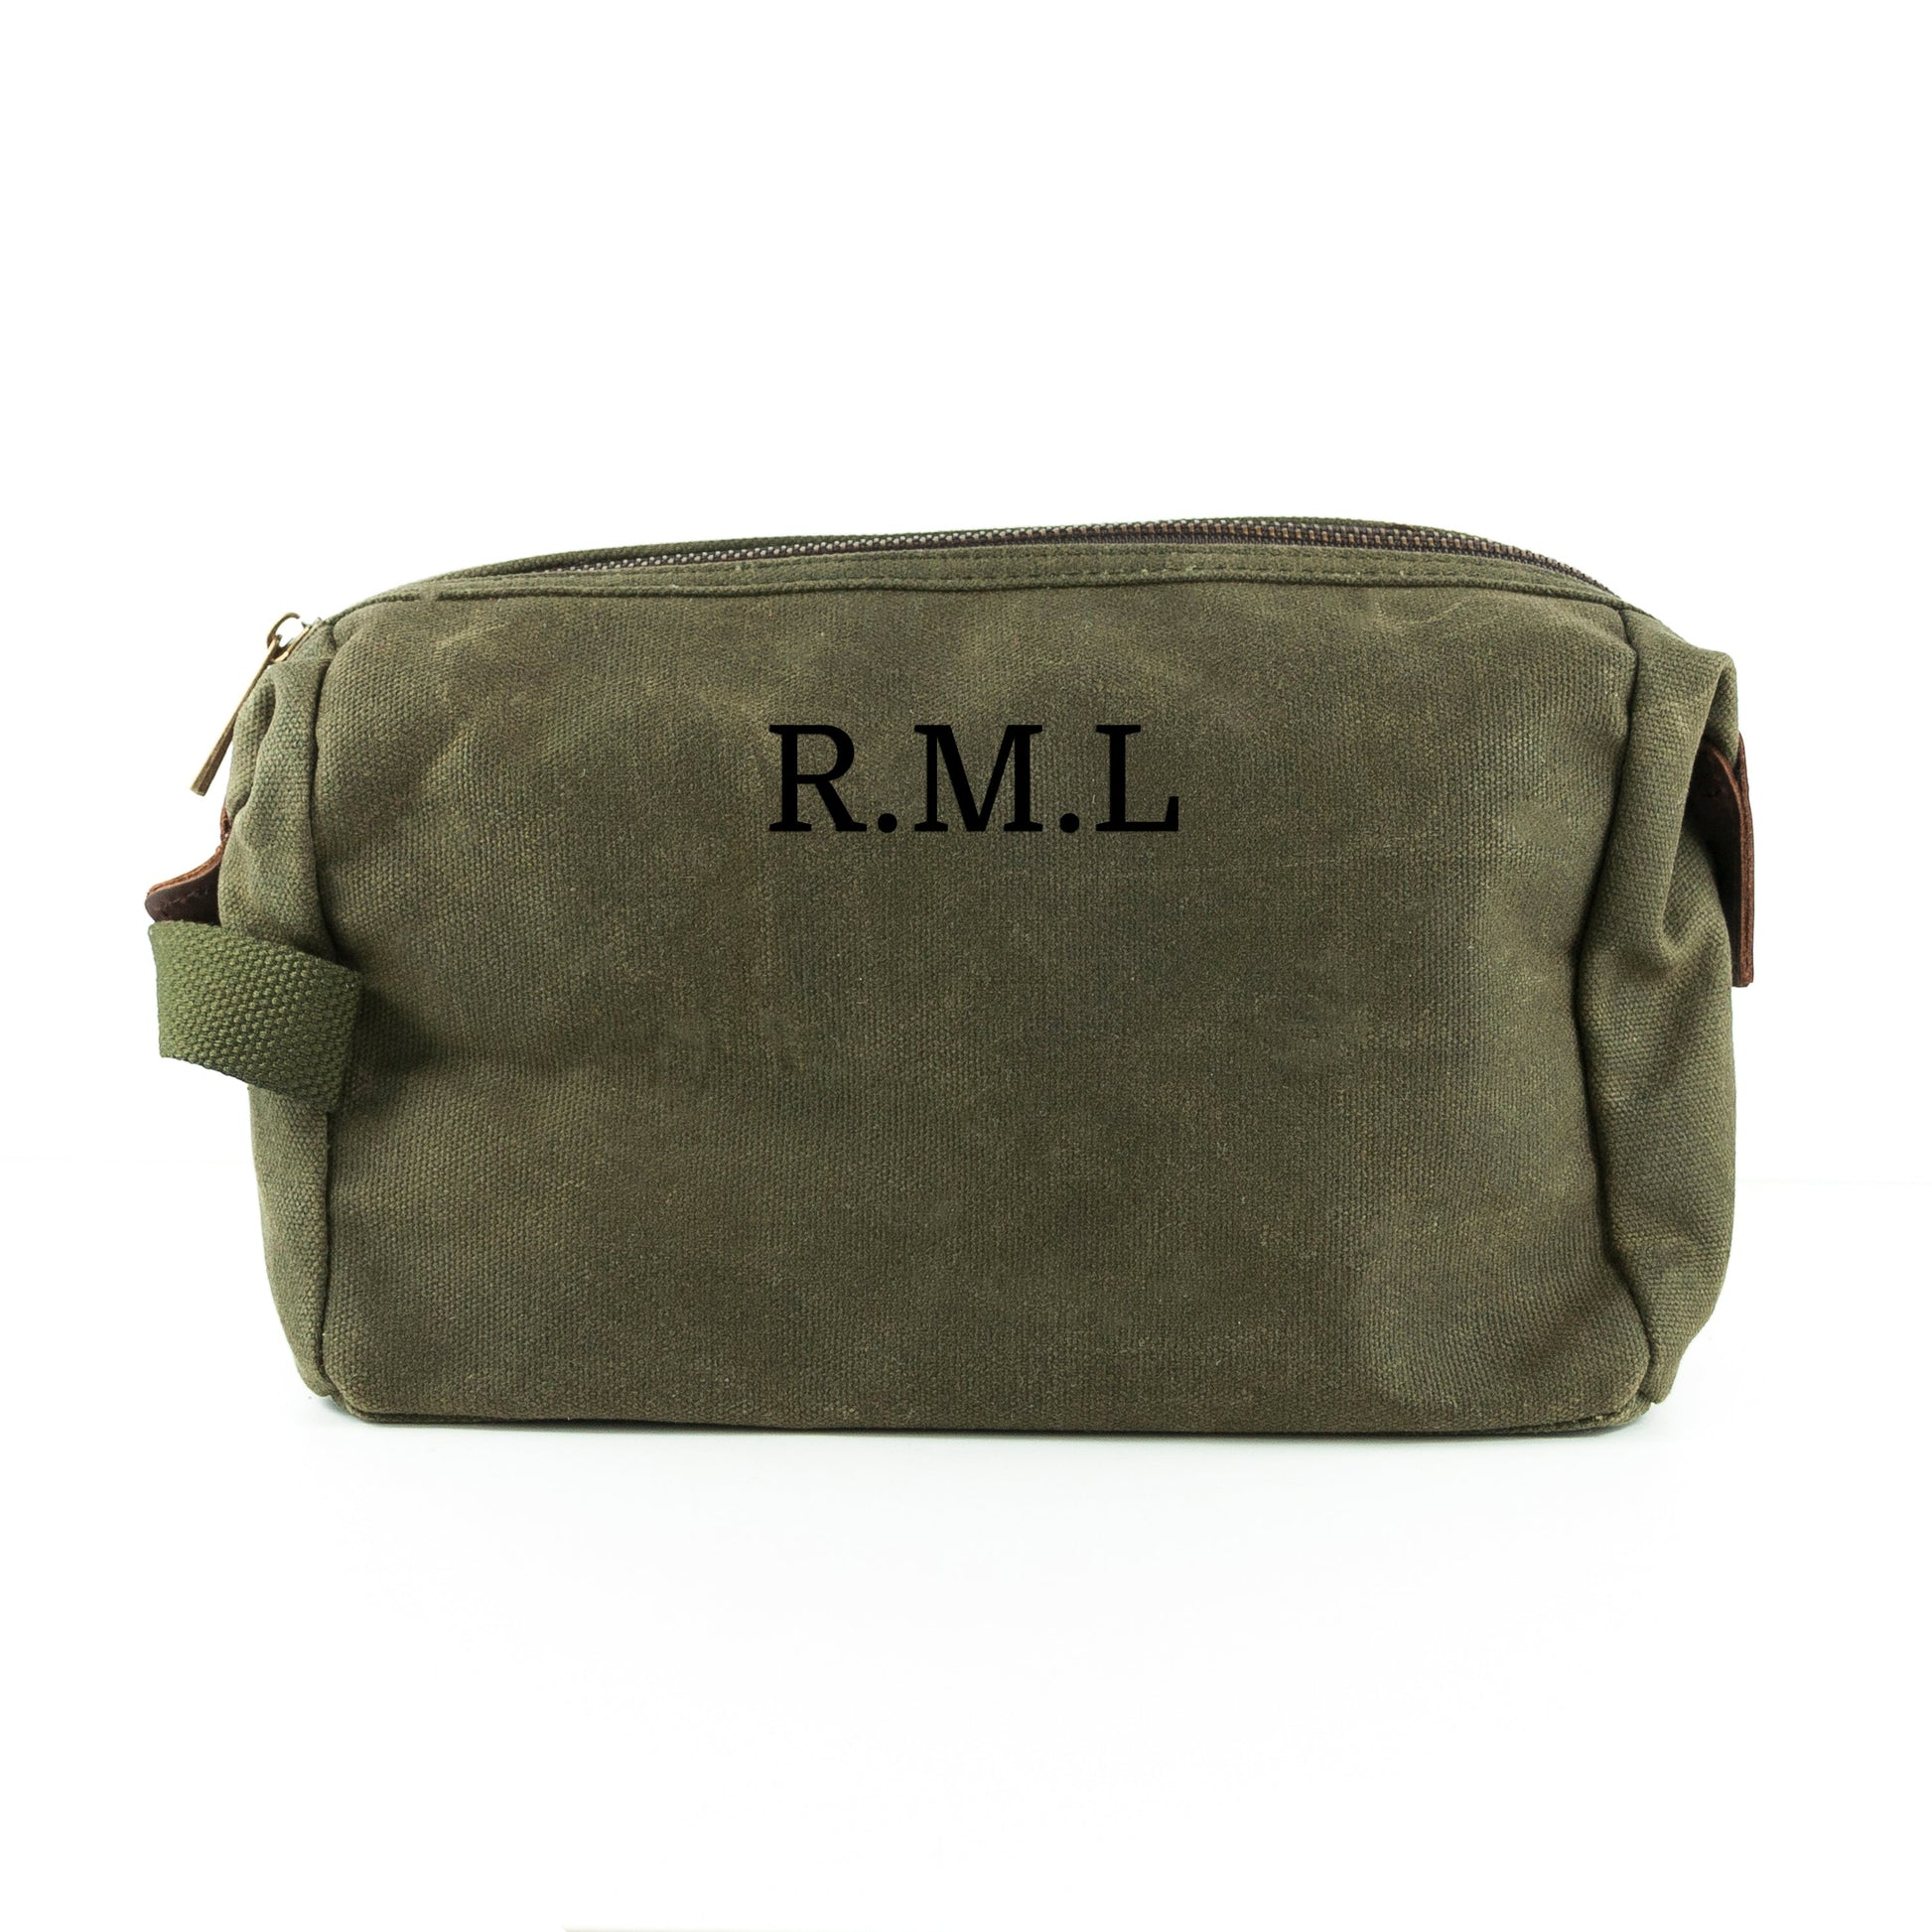 Personalized Men's Washbags - Personalized Men’s Vintage Waxed Canvas Wash Bag 